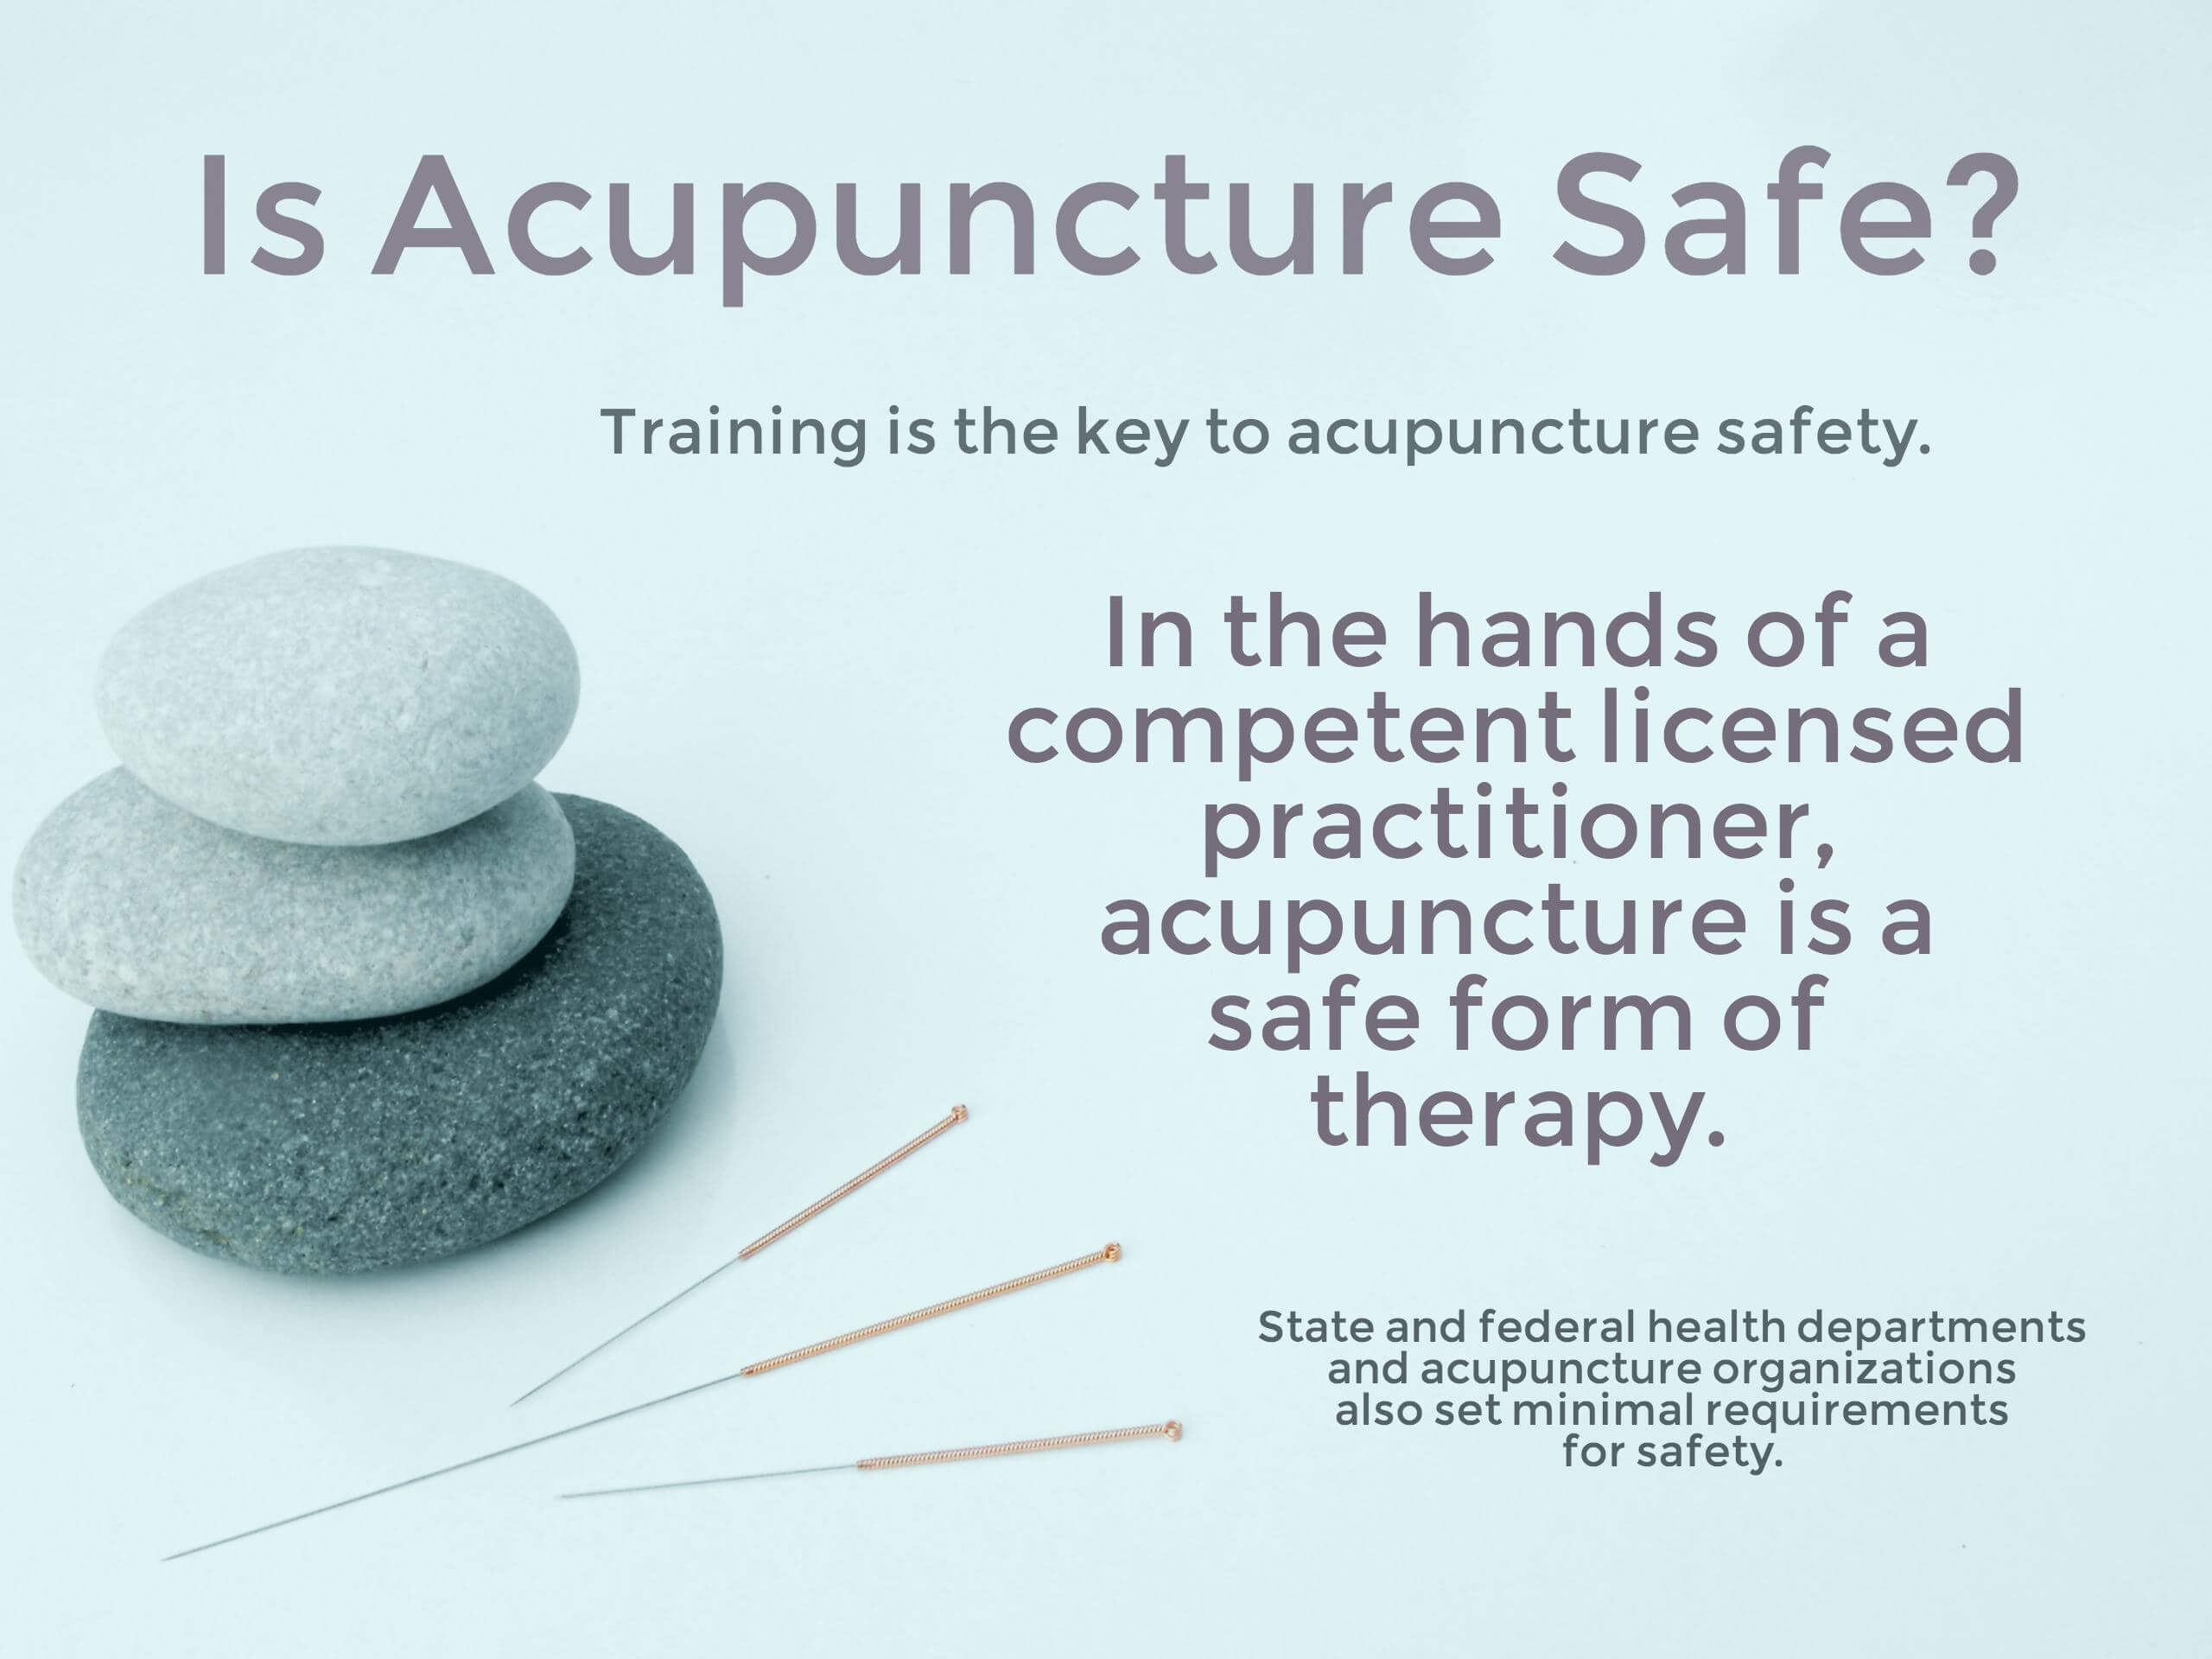 Acupuncture therapy is safe with competent licensed practitioner